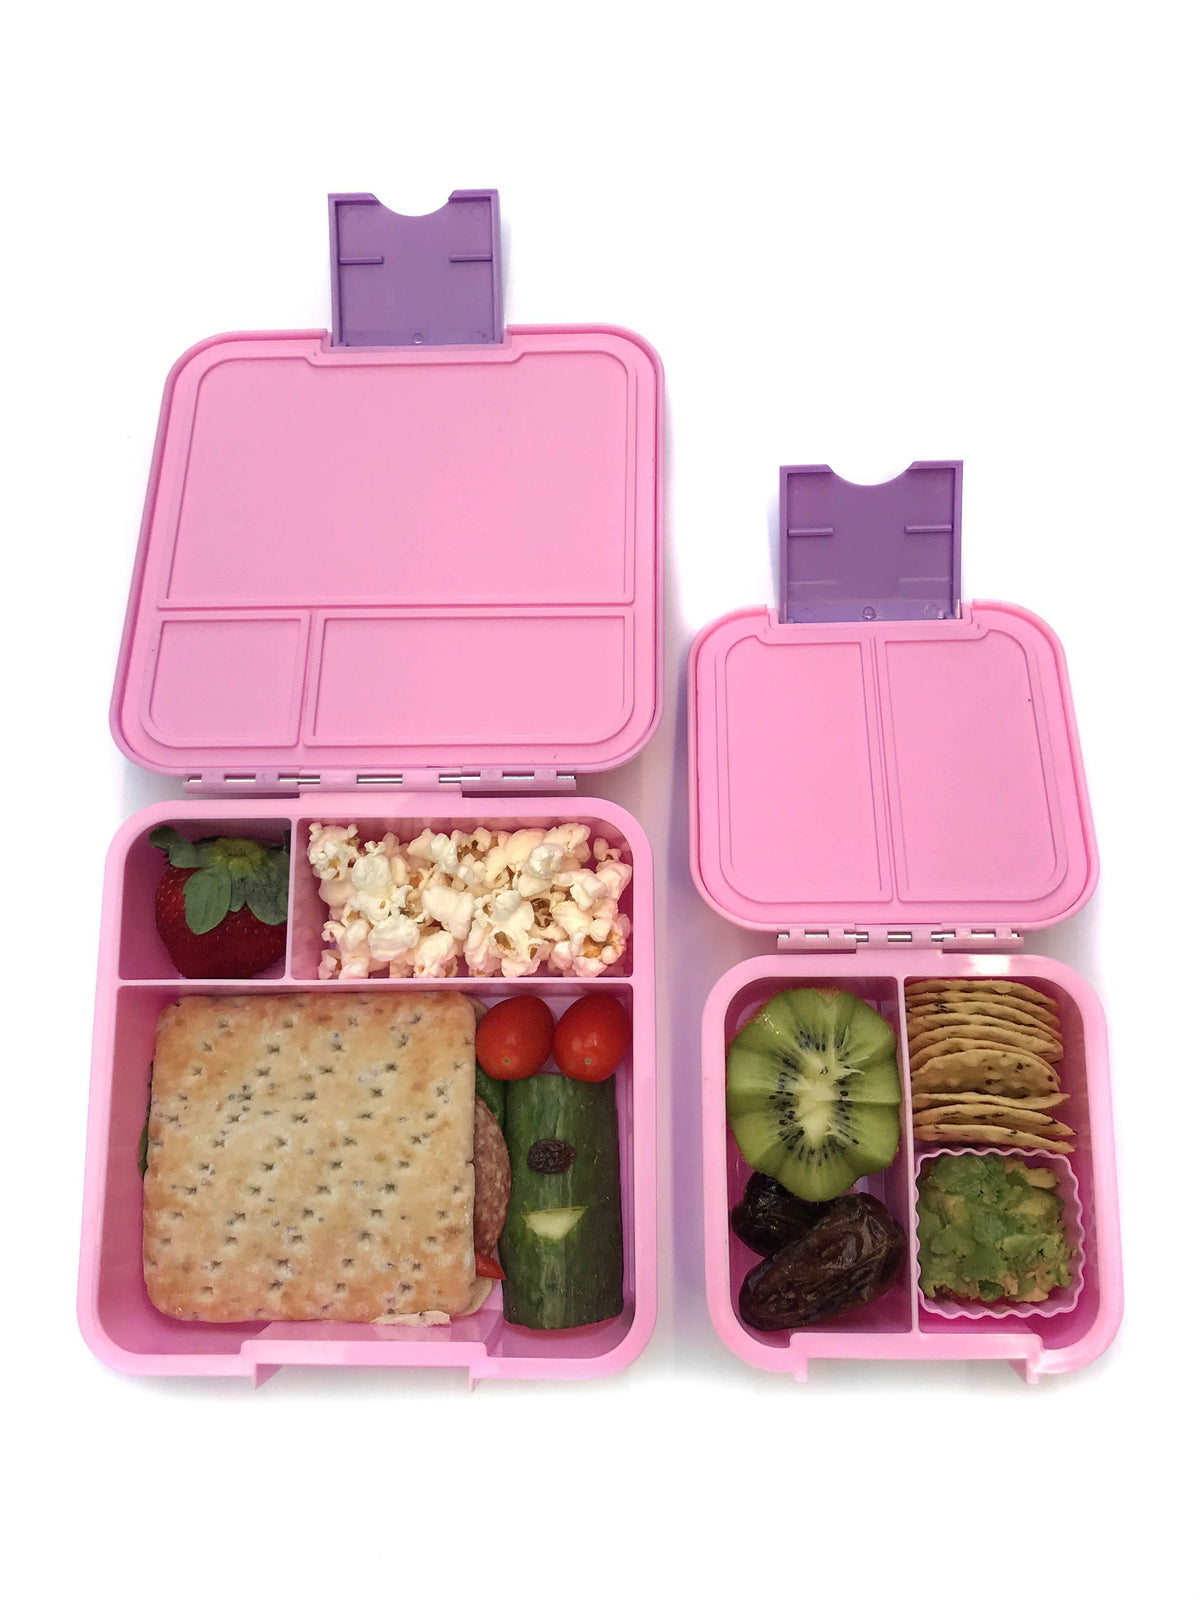 Little Lunch Box Co - Bento Two - Mermaid